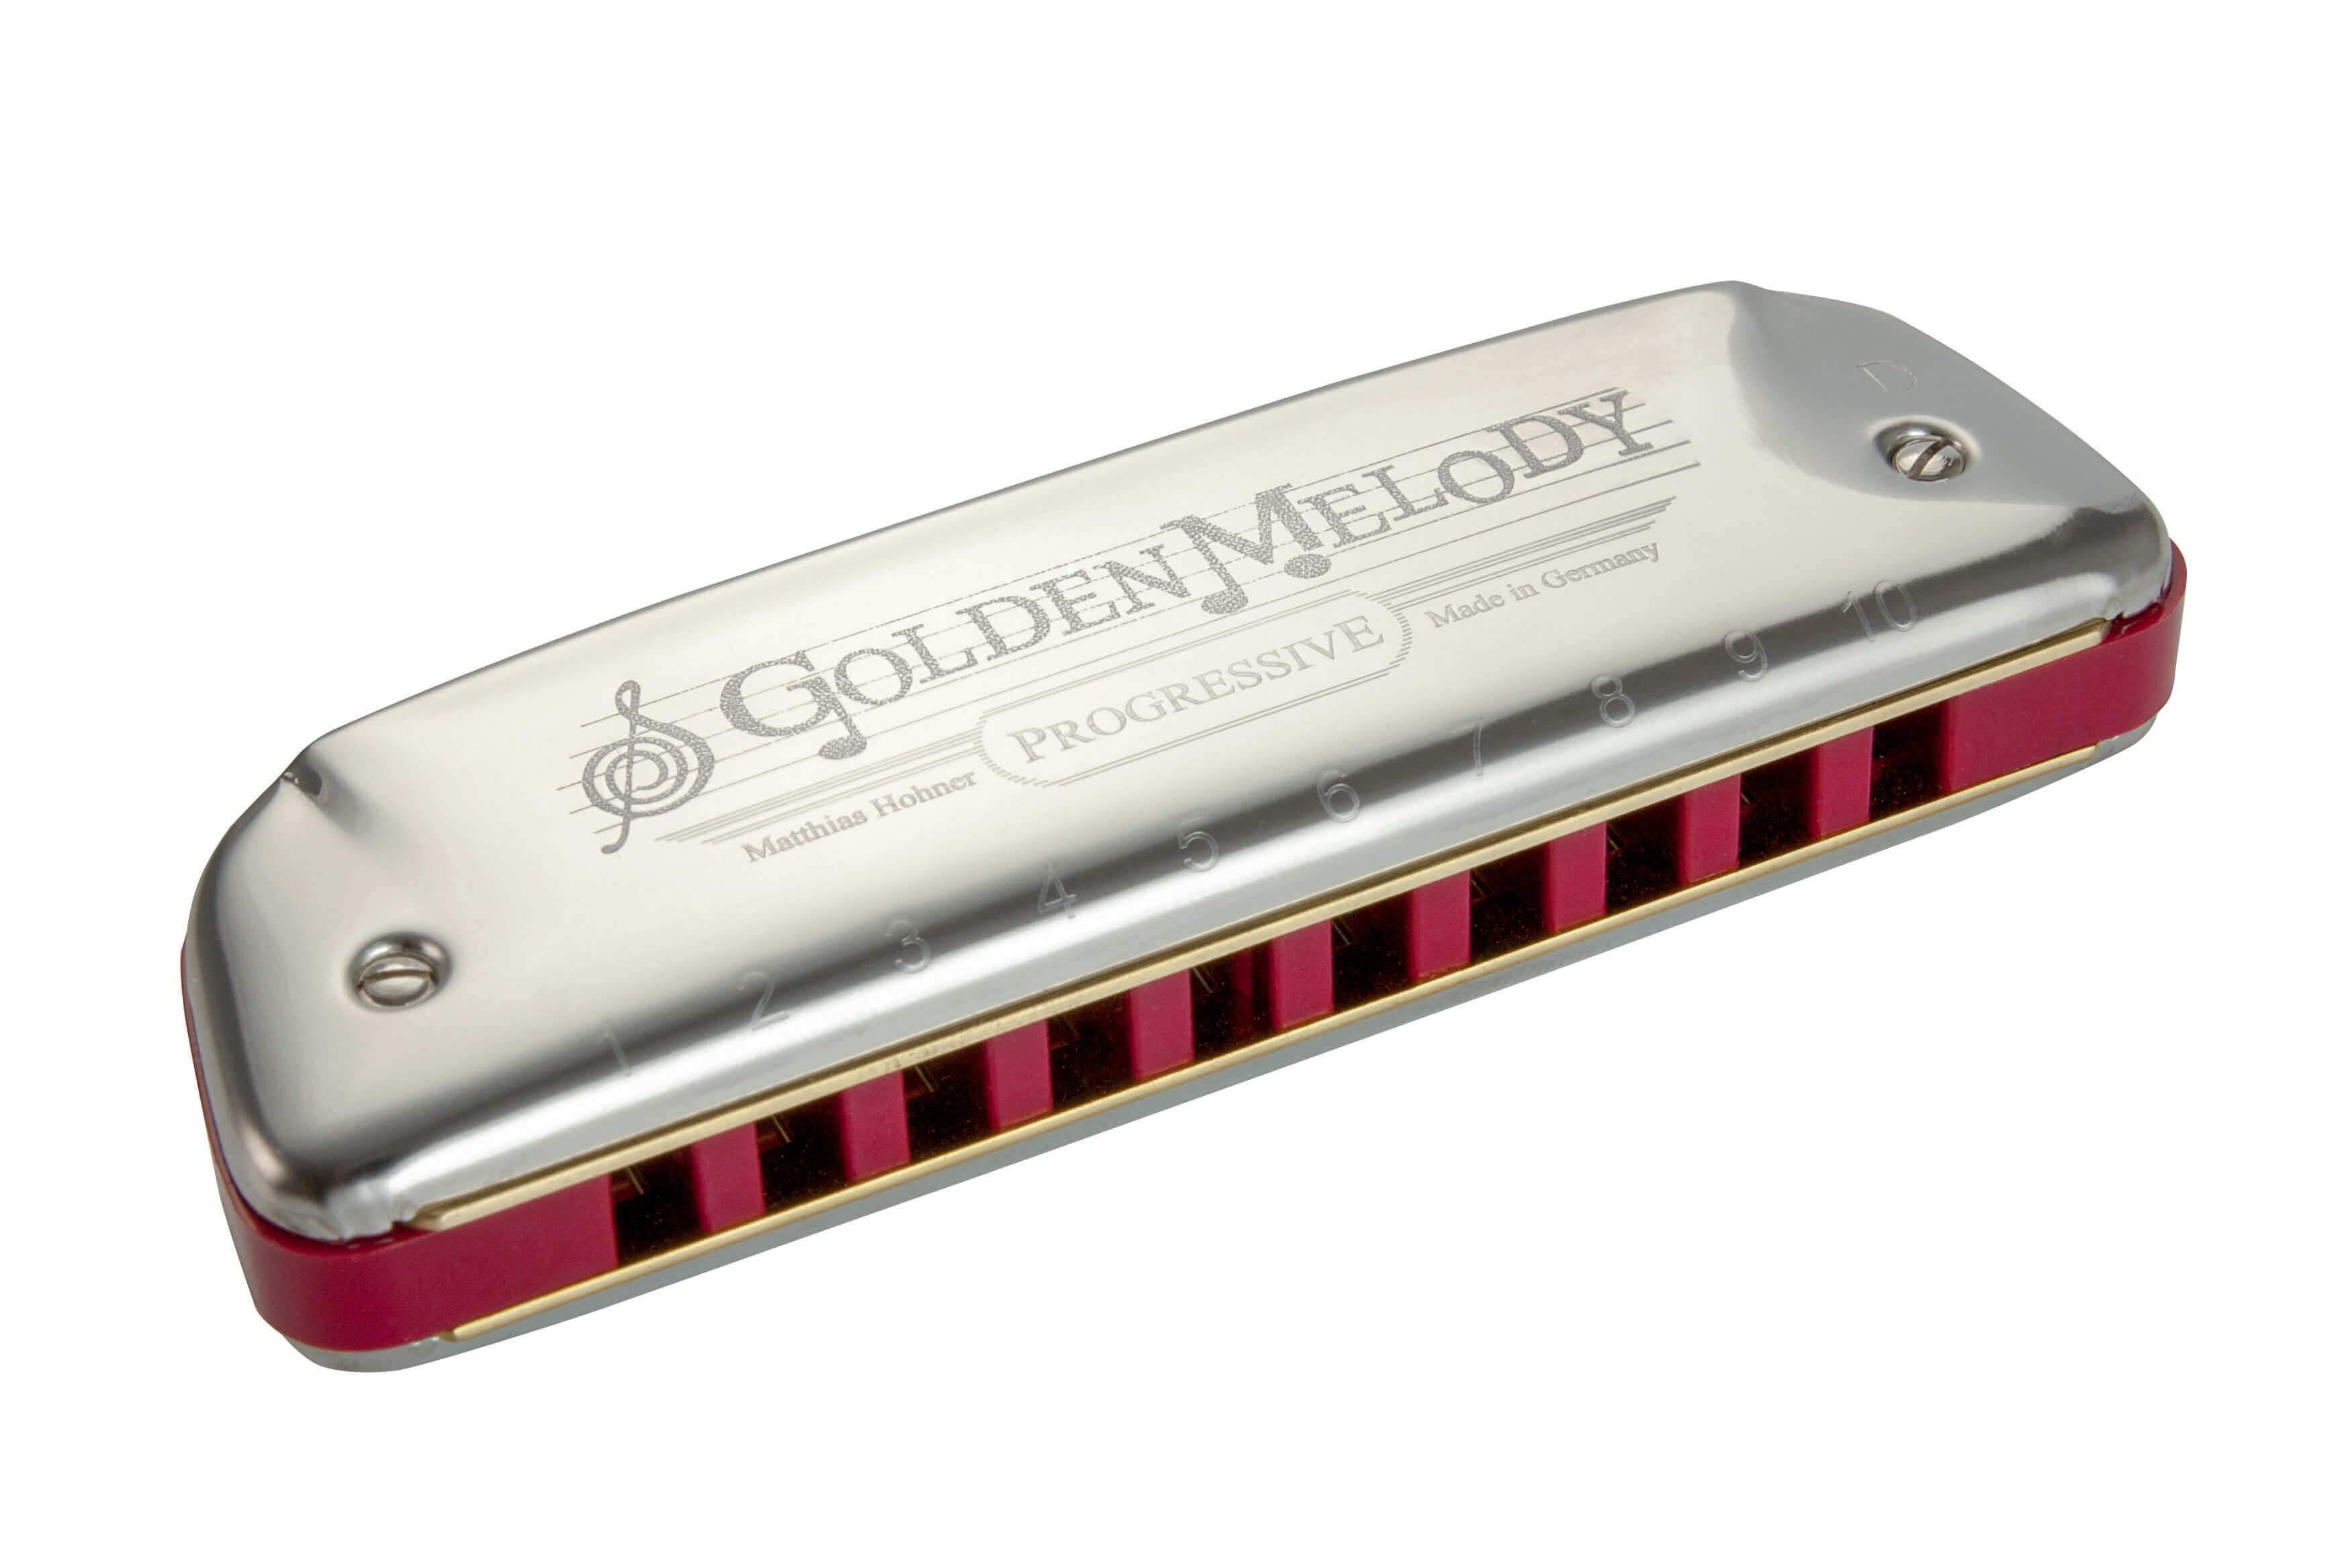 Hohner - Golden Melody G Harmonica 542/20 - Harmonicas by Hohner at Muso's Stuff